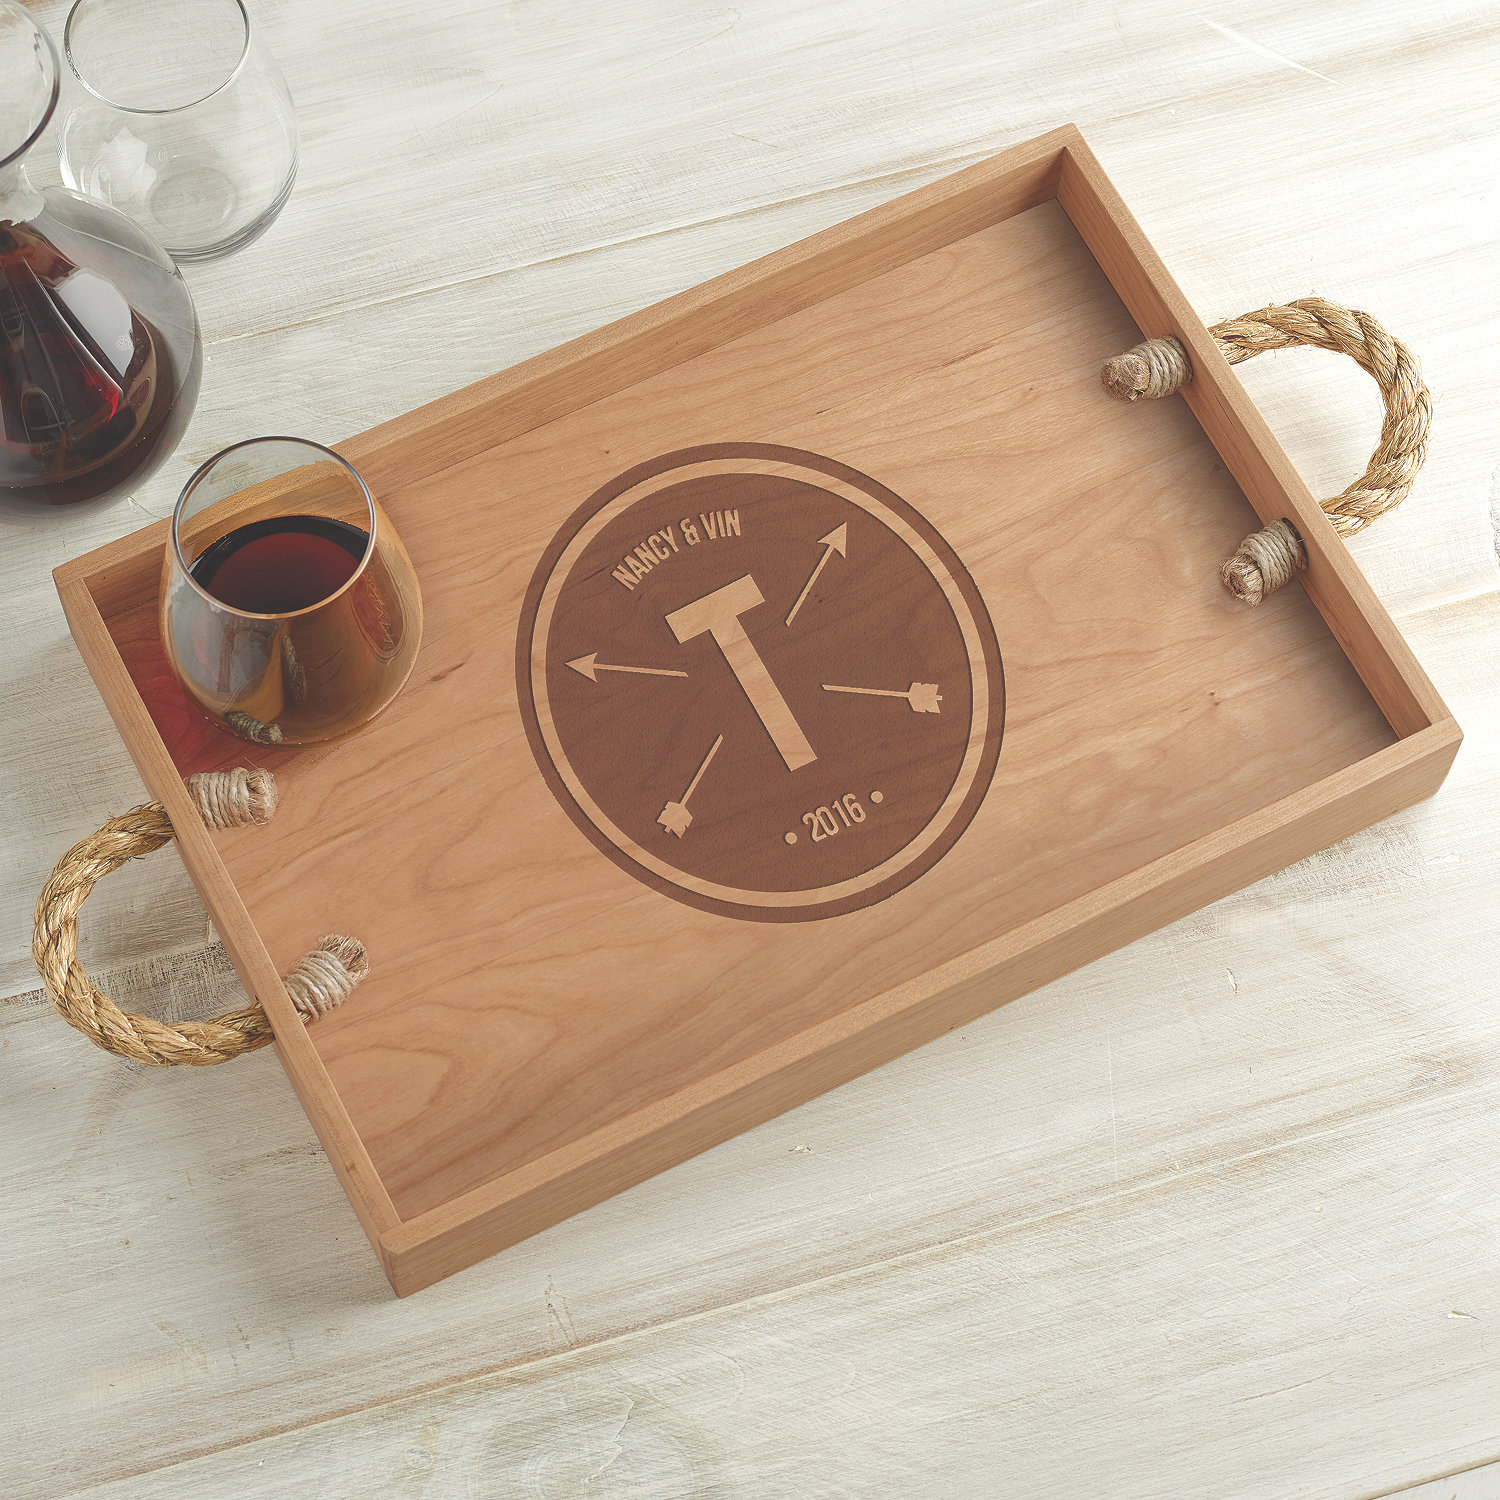 Personalized Crate Tray with Rope Handles - Wine Enthusiast